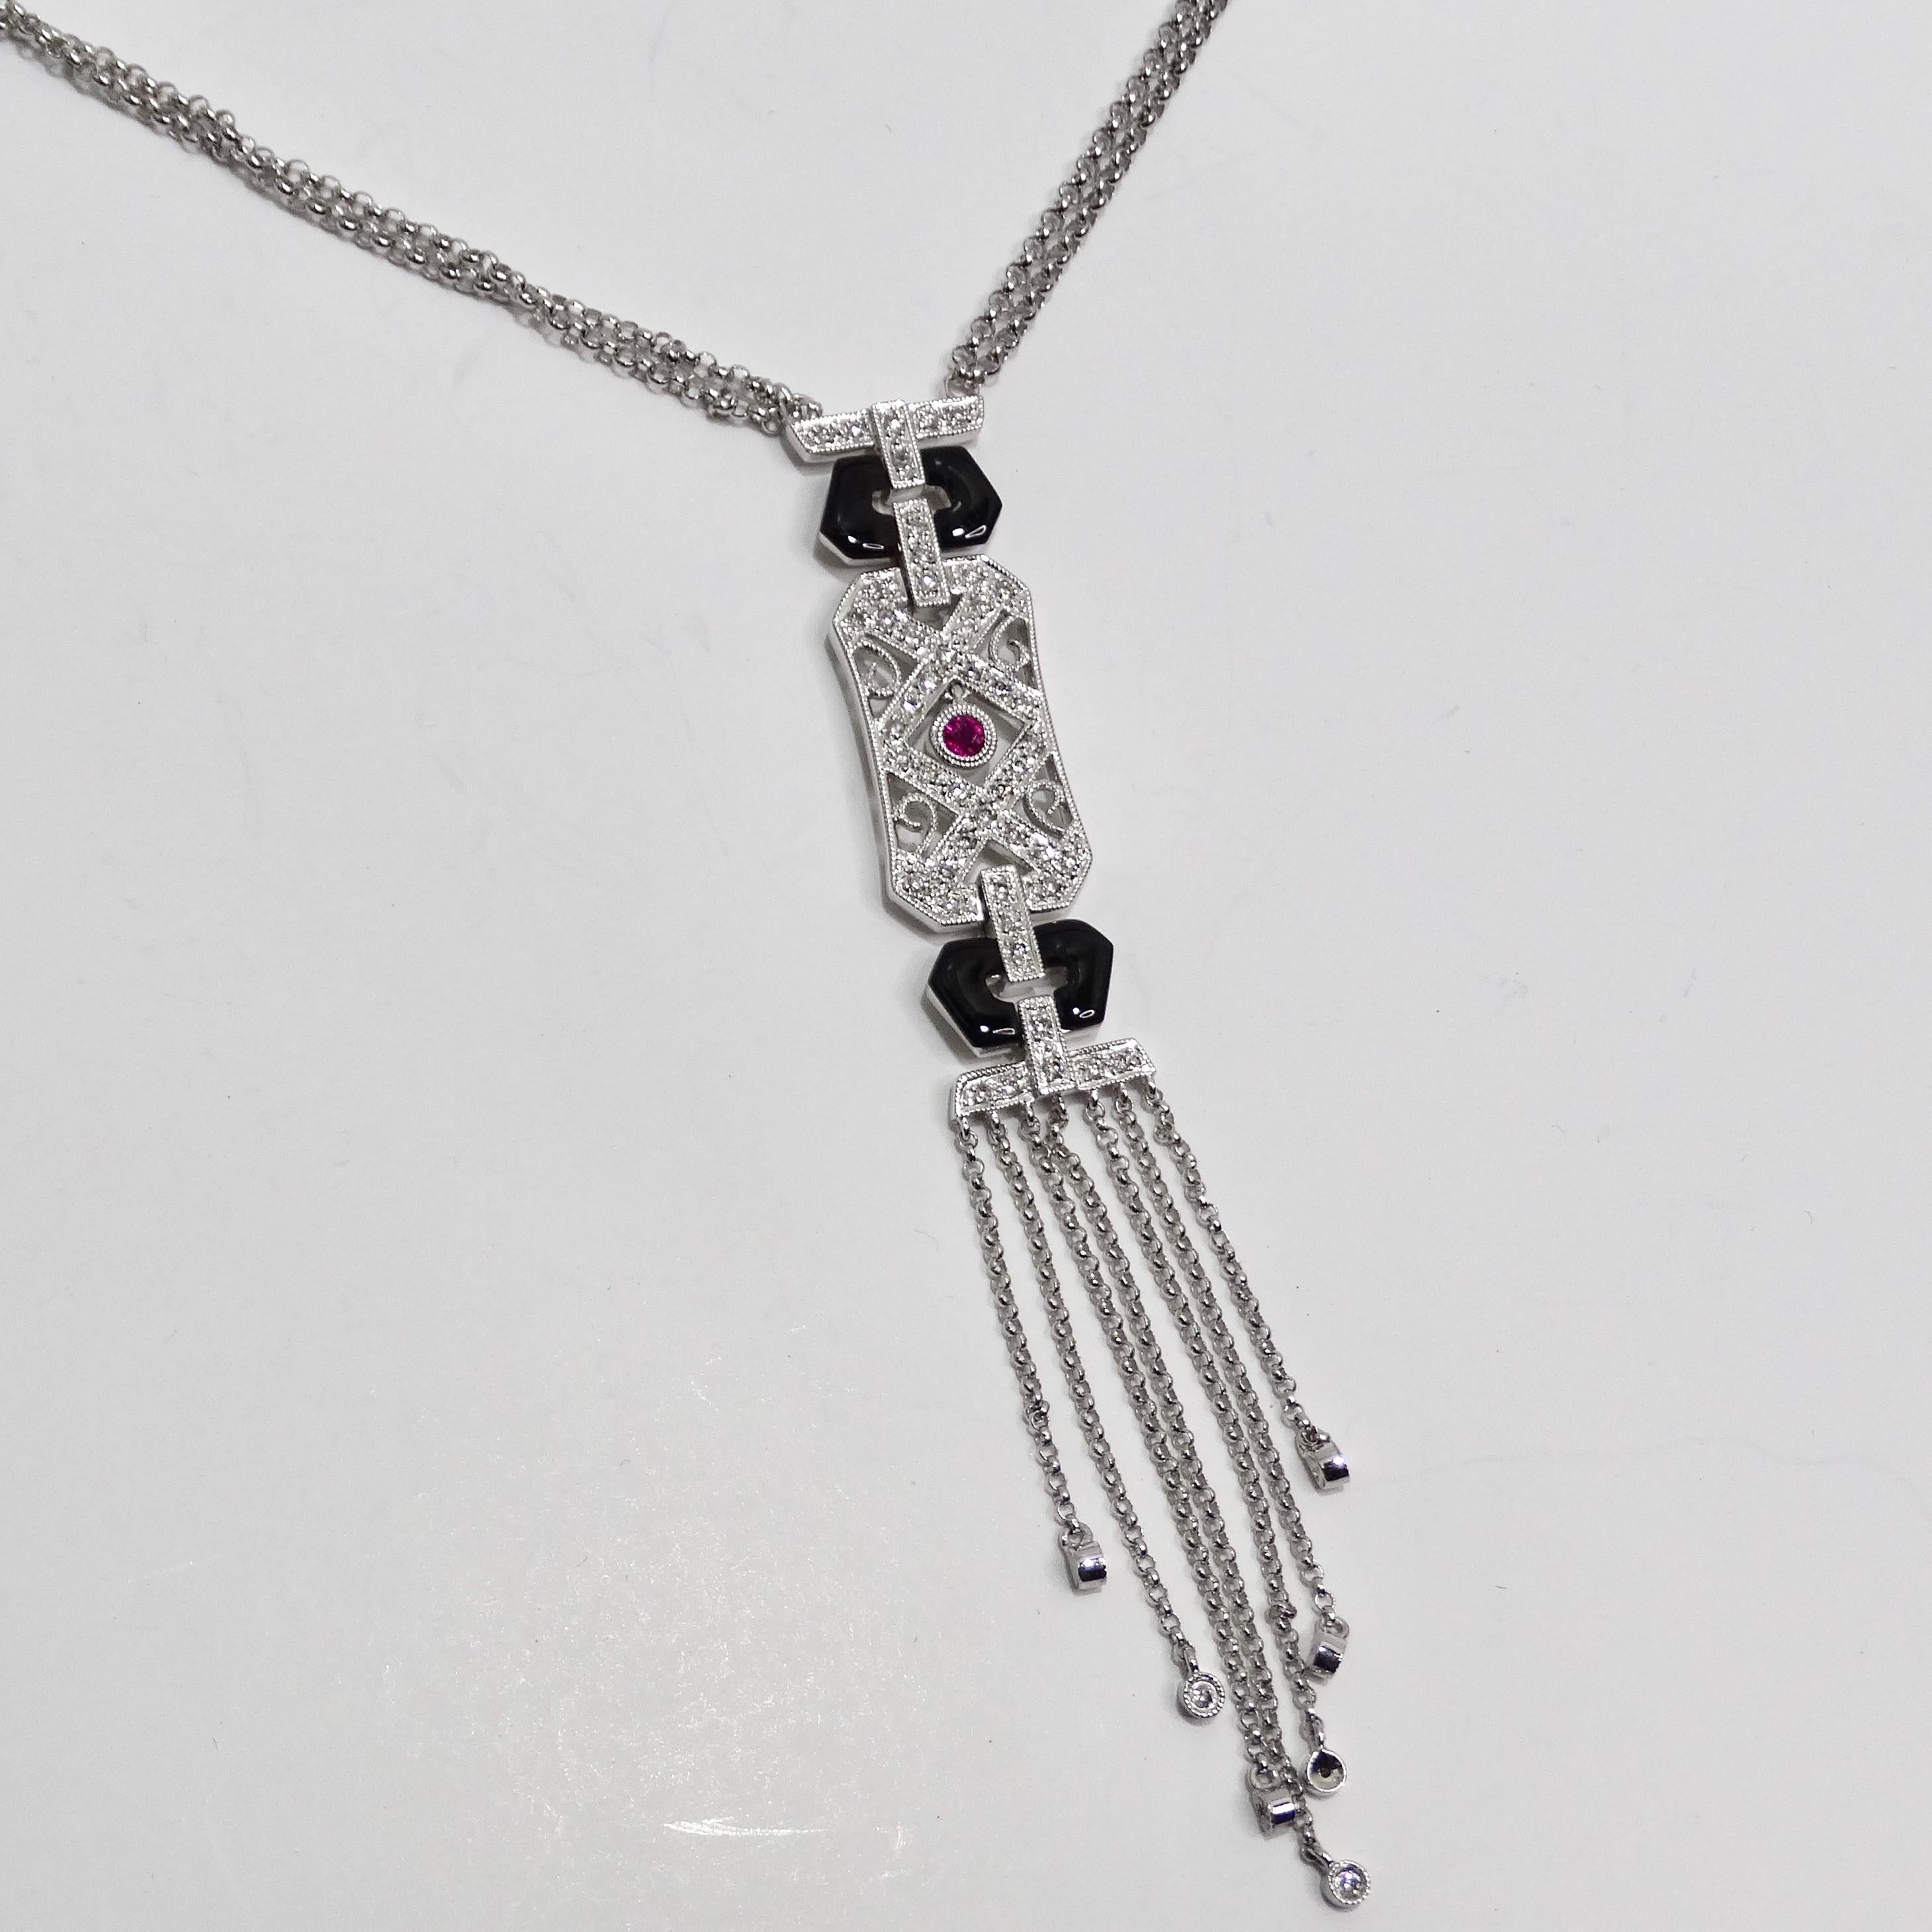 14K White Gold Diamond, Ruby, and Onyx Necklace For Sale 2